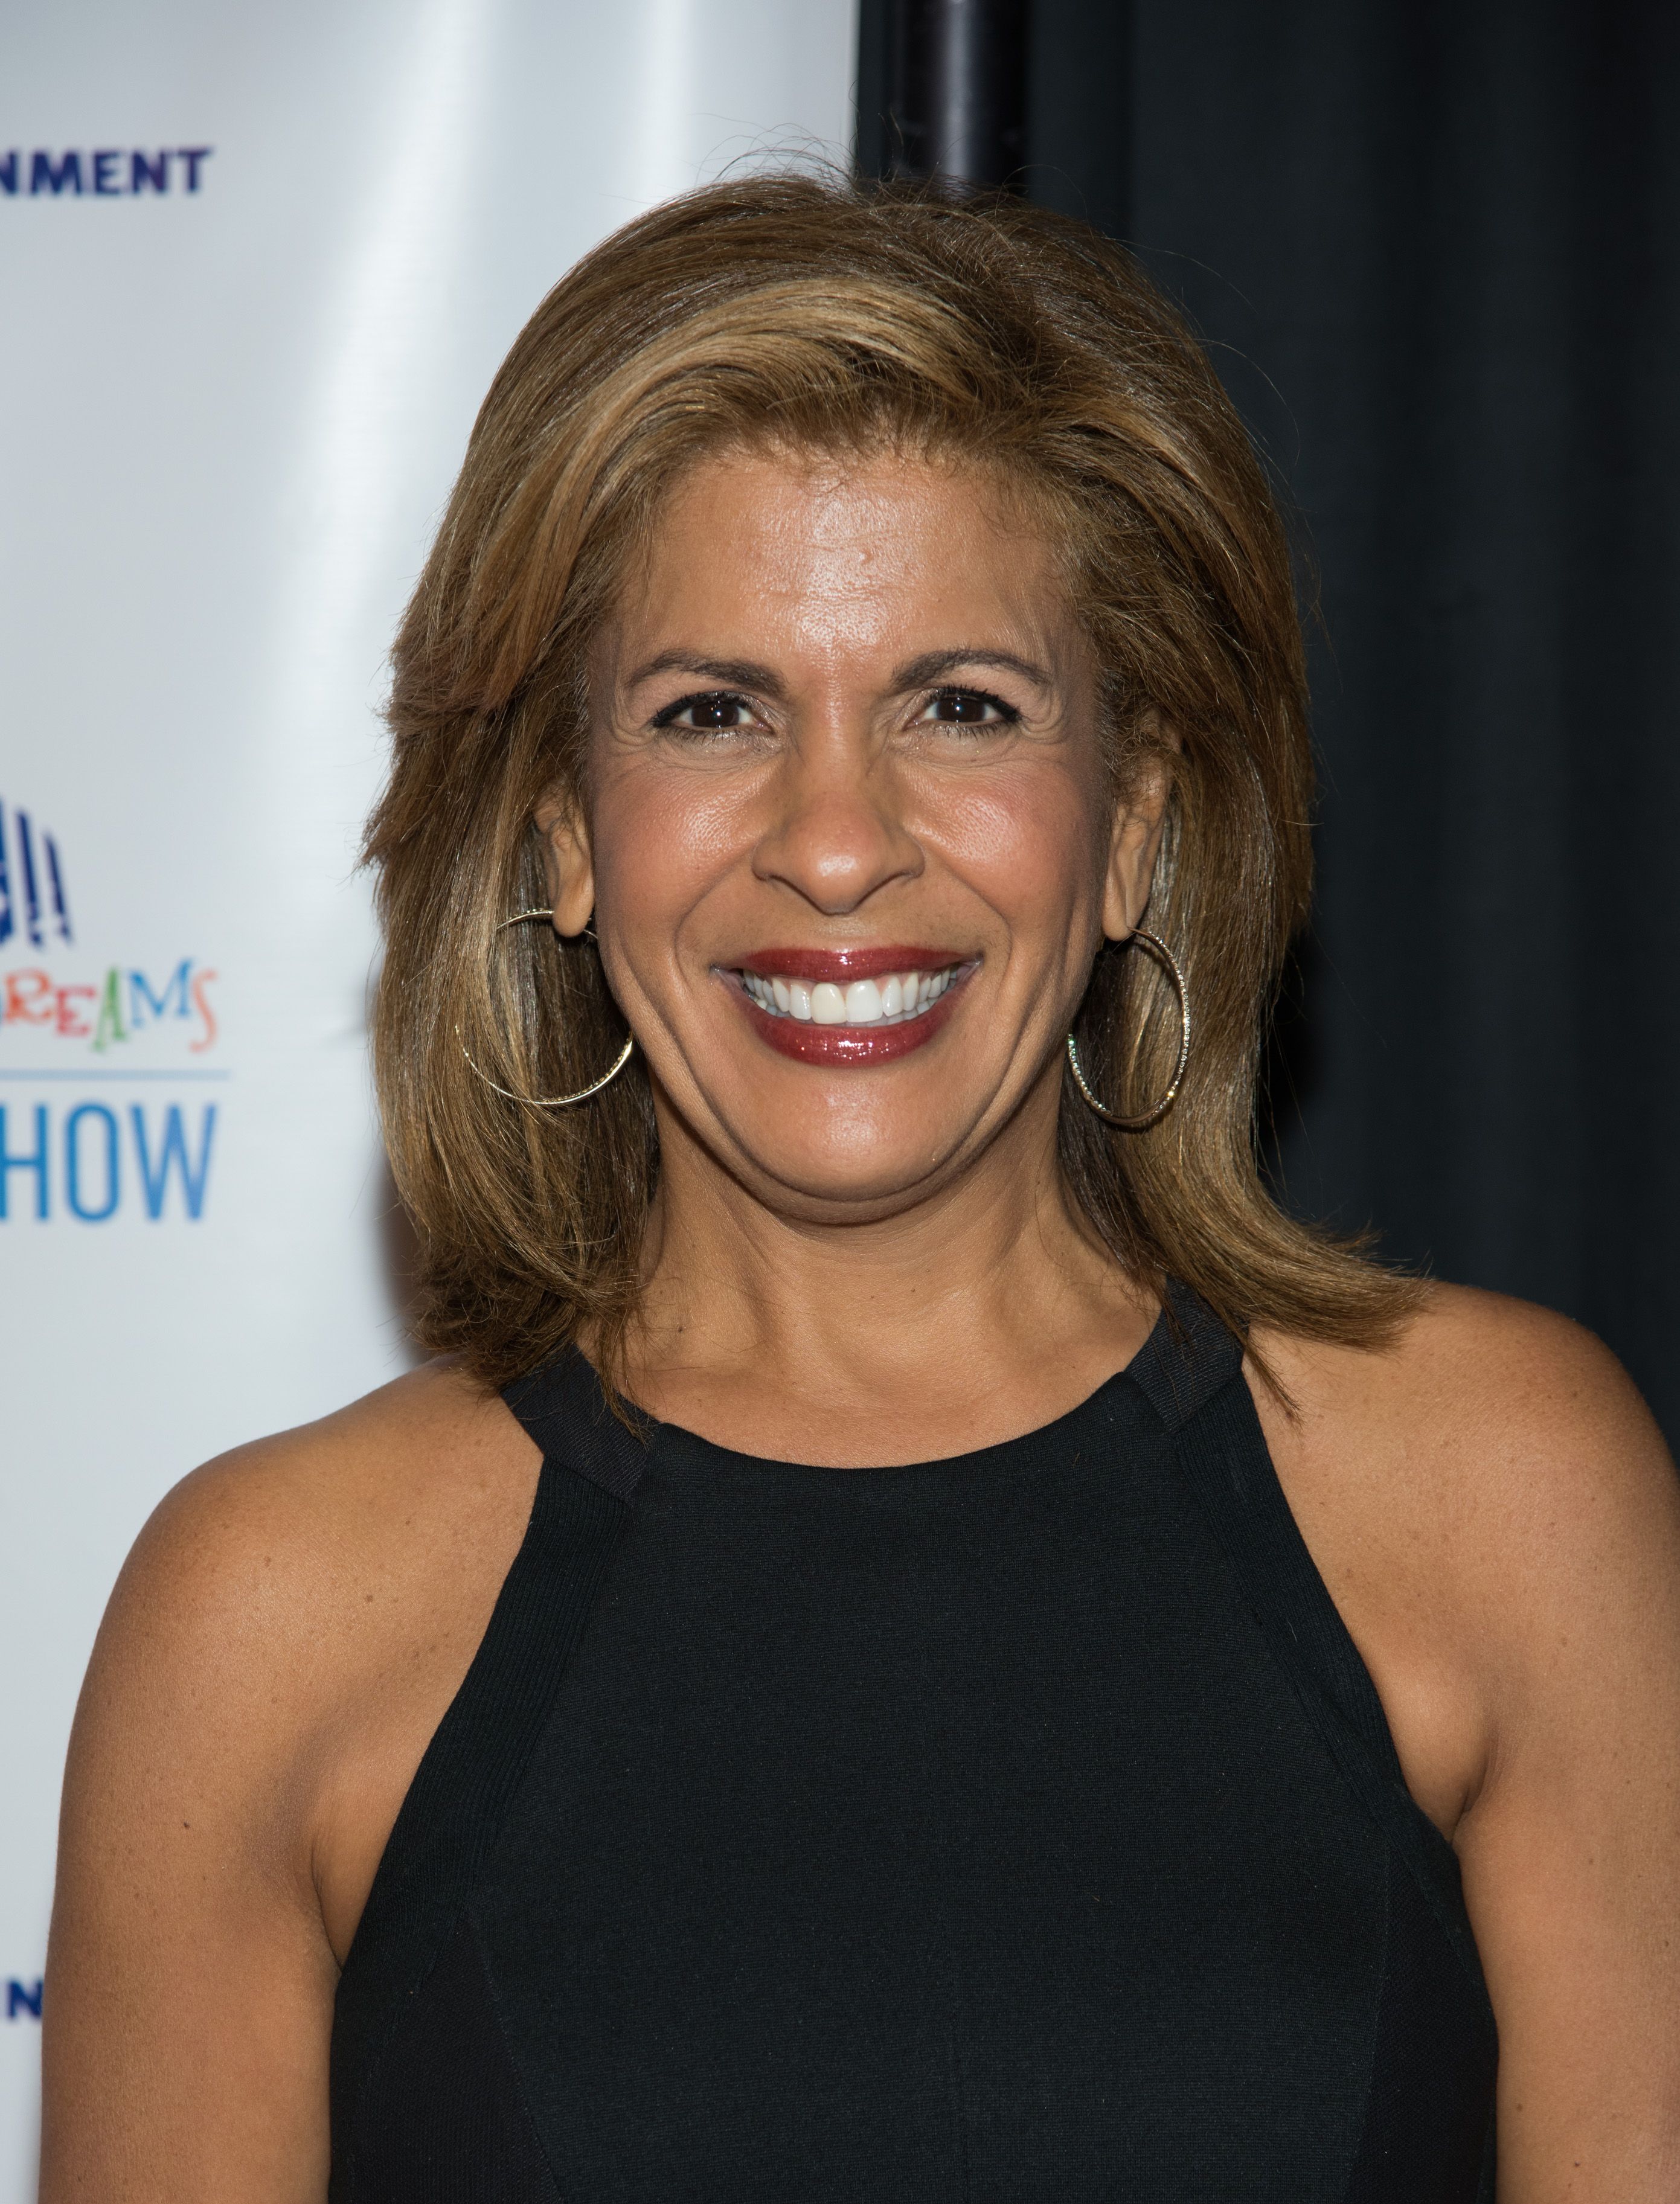 Hoda Kotb on June 18, 2015 in New York City | Source: Getty Images